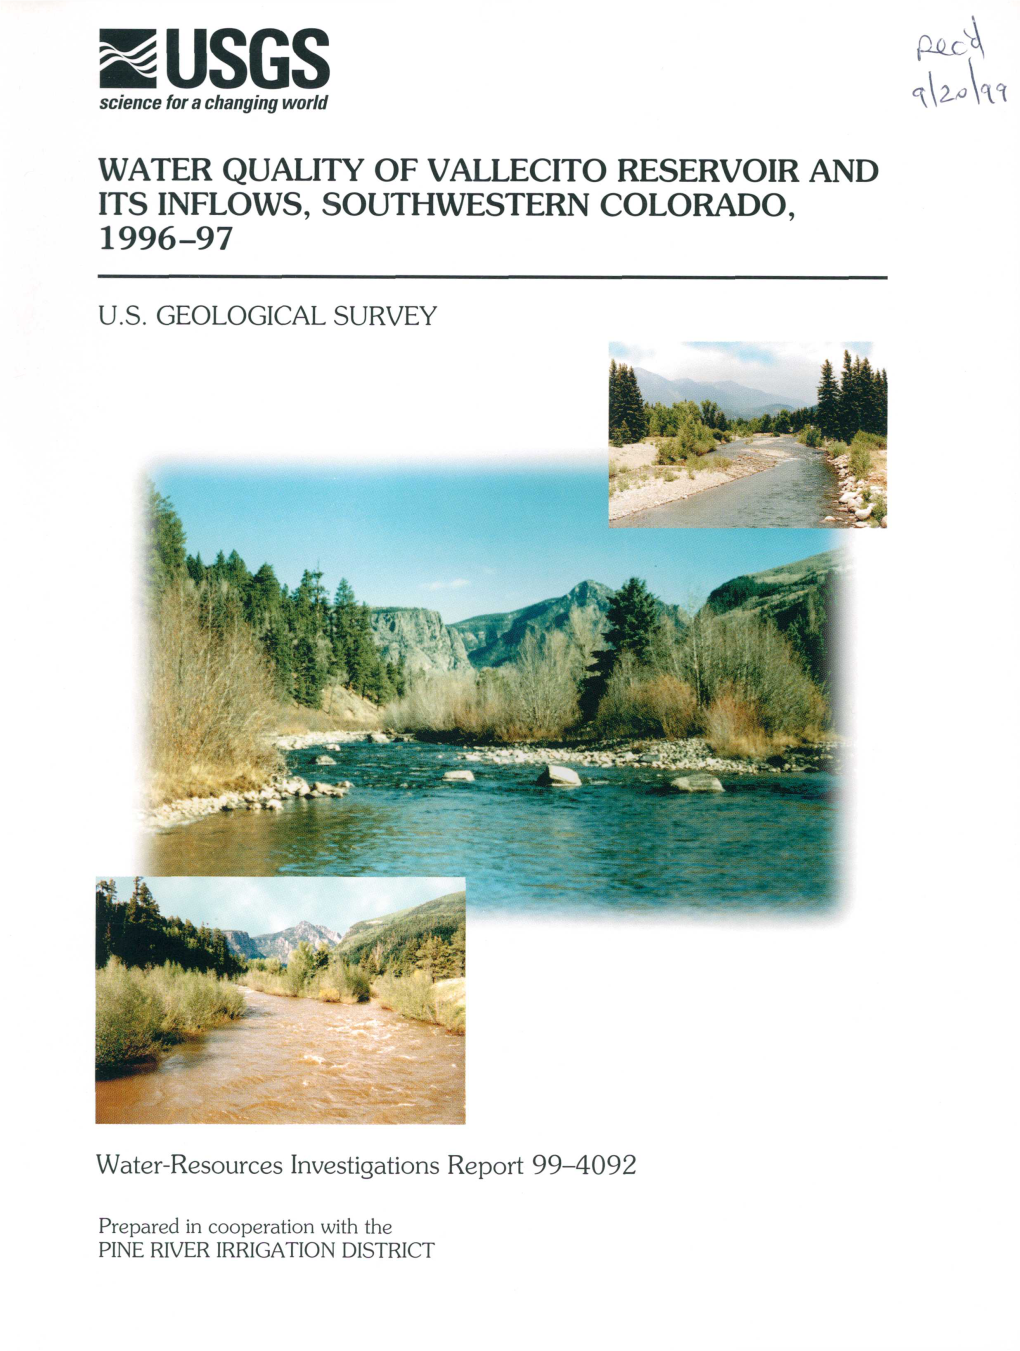 2 USGS Science for a Changing World